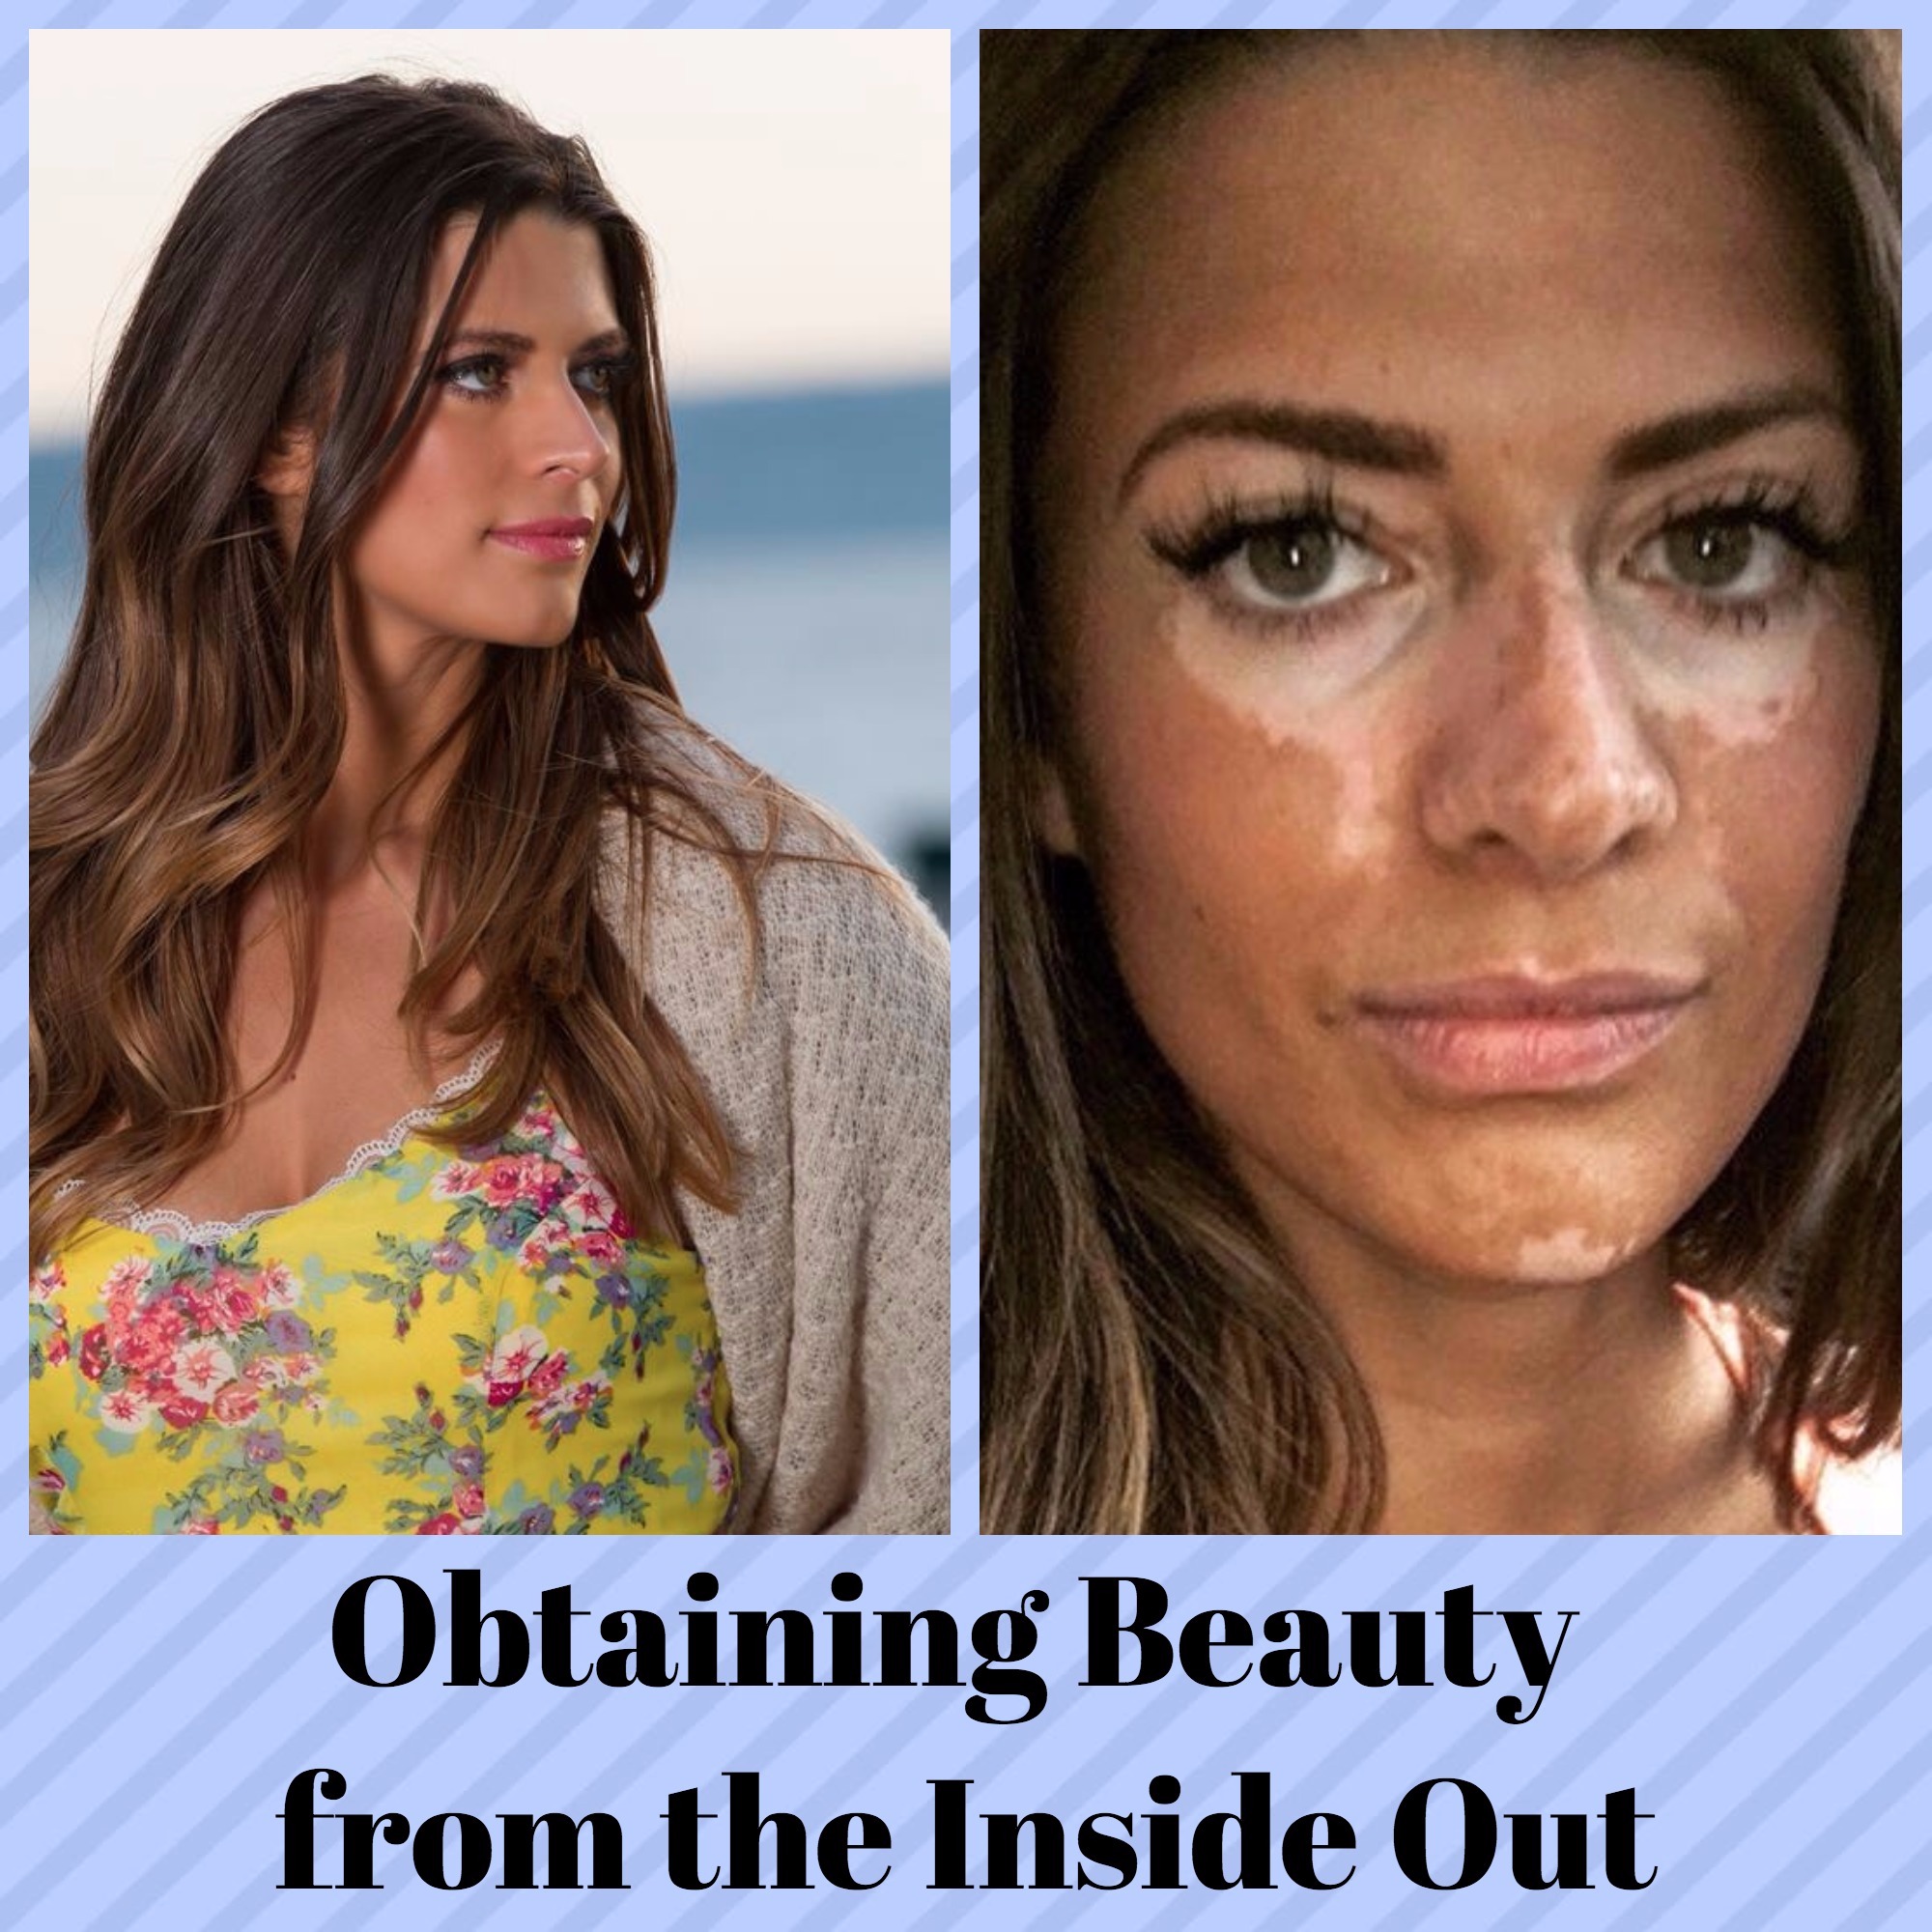 Obtaining Beauty from the Inside Out